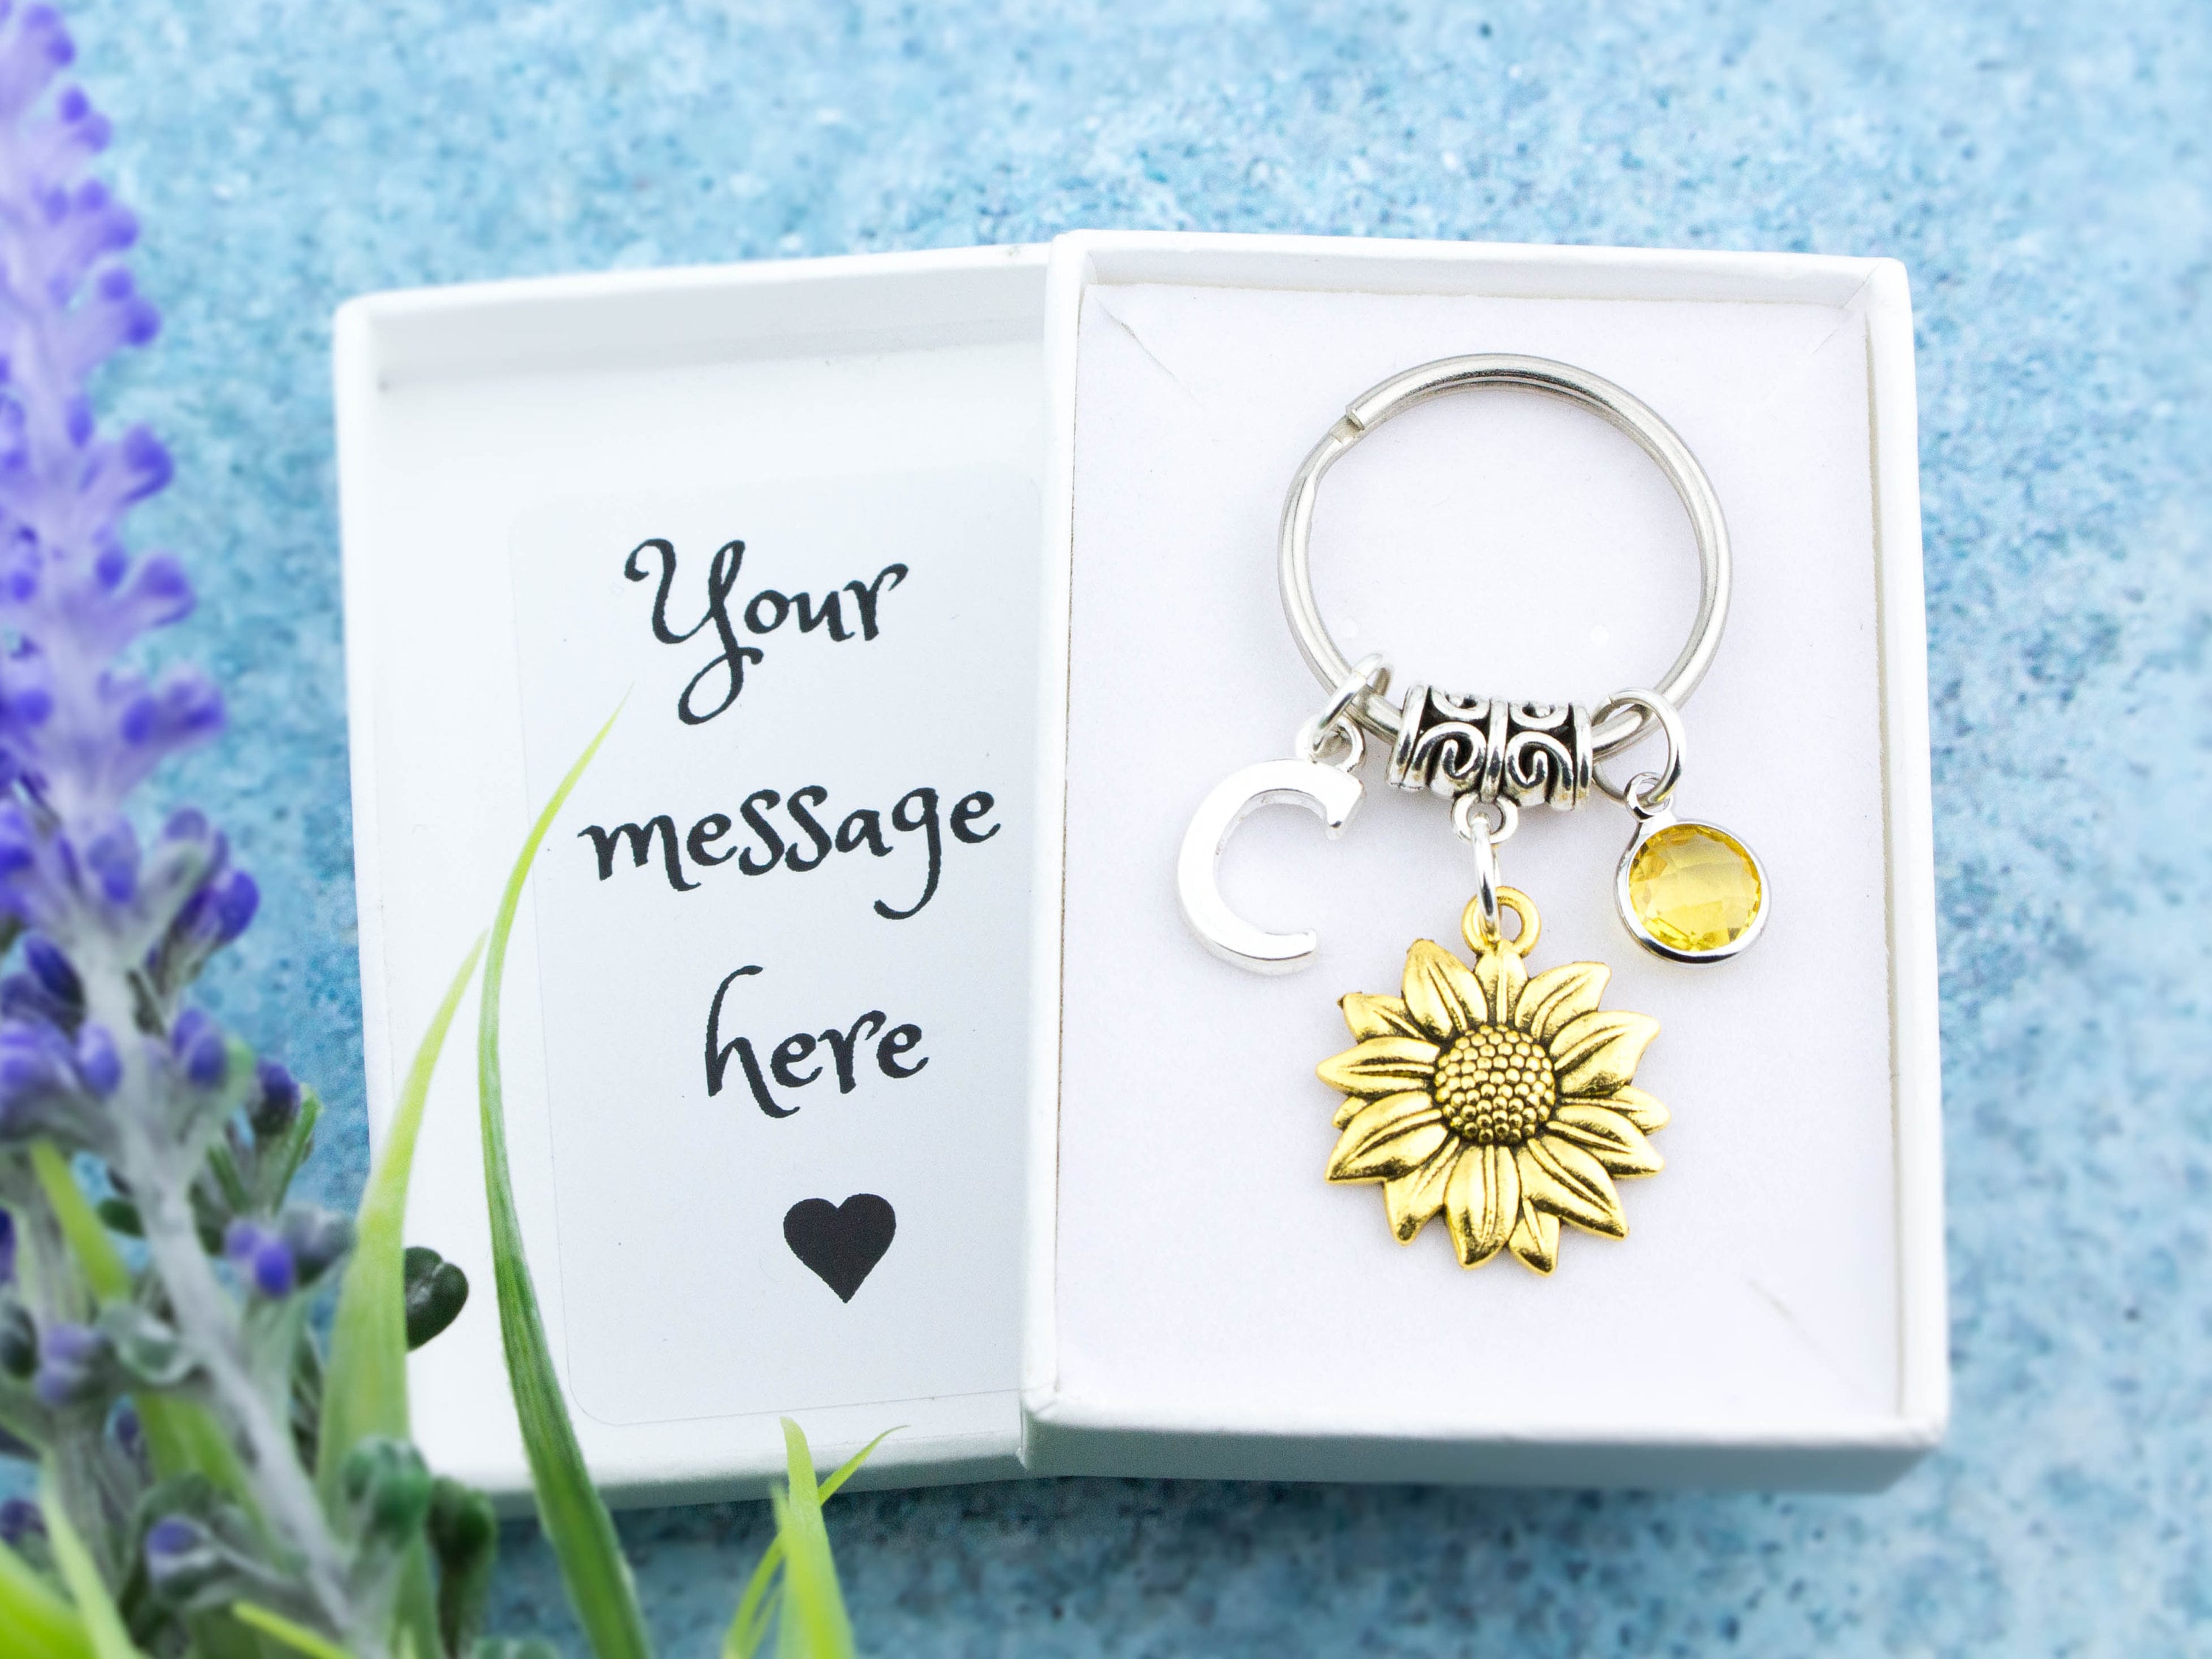 Sun Flower Charms, Gold SunFlower Pendant, Dainty Flower Charm, Small  Medallion Charm for Necklace Floral Flower Jewelry I-739